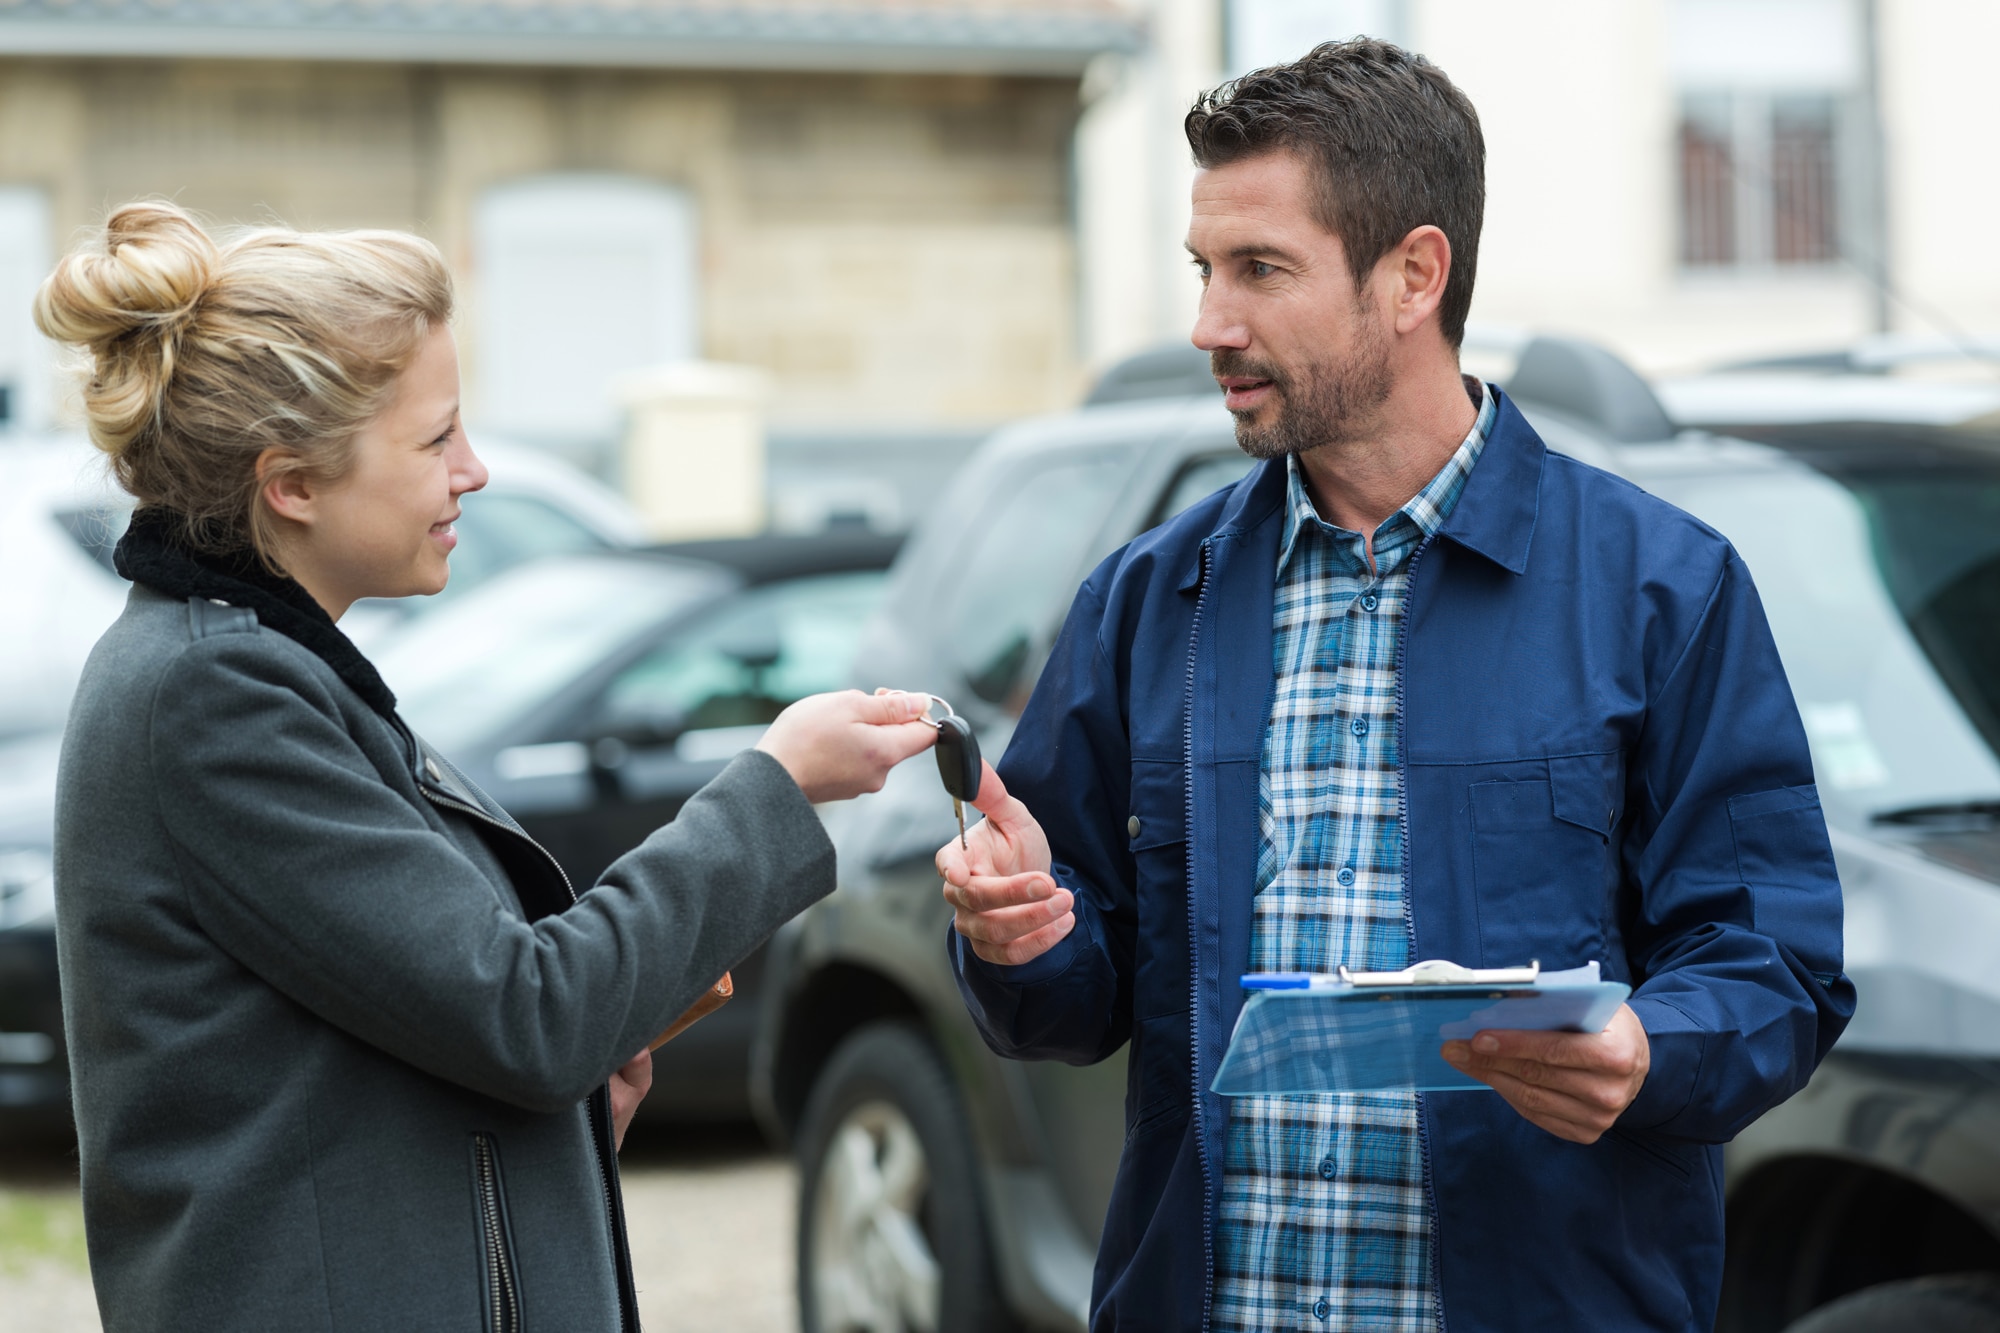 Woman handing car key over to man with clipboard